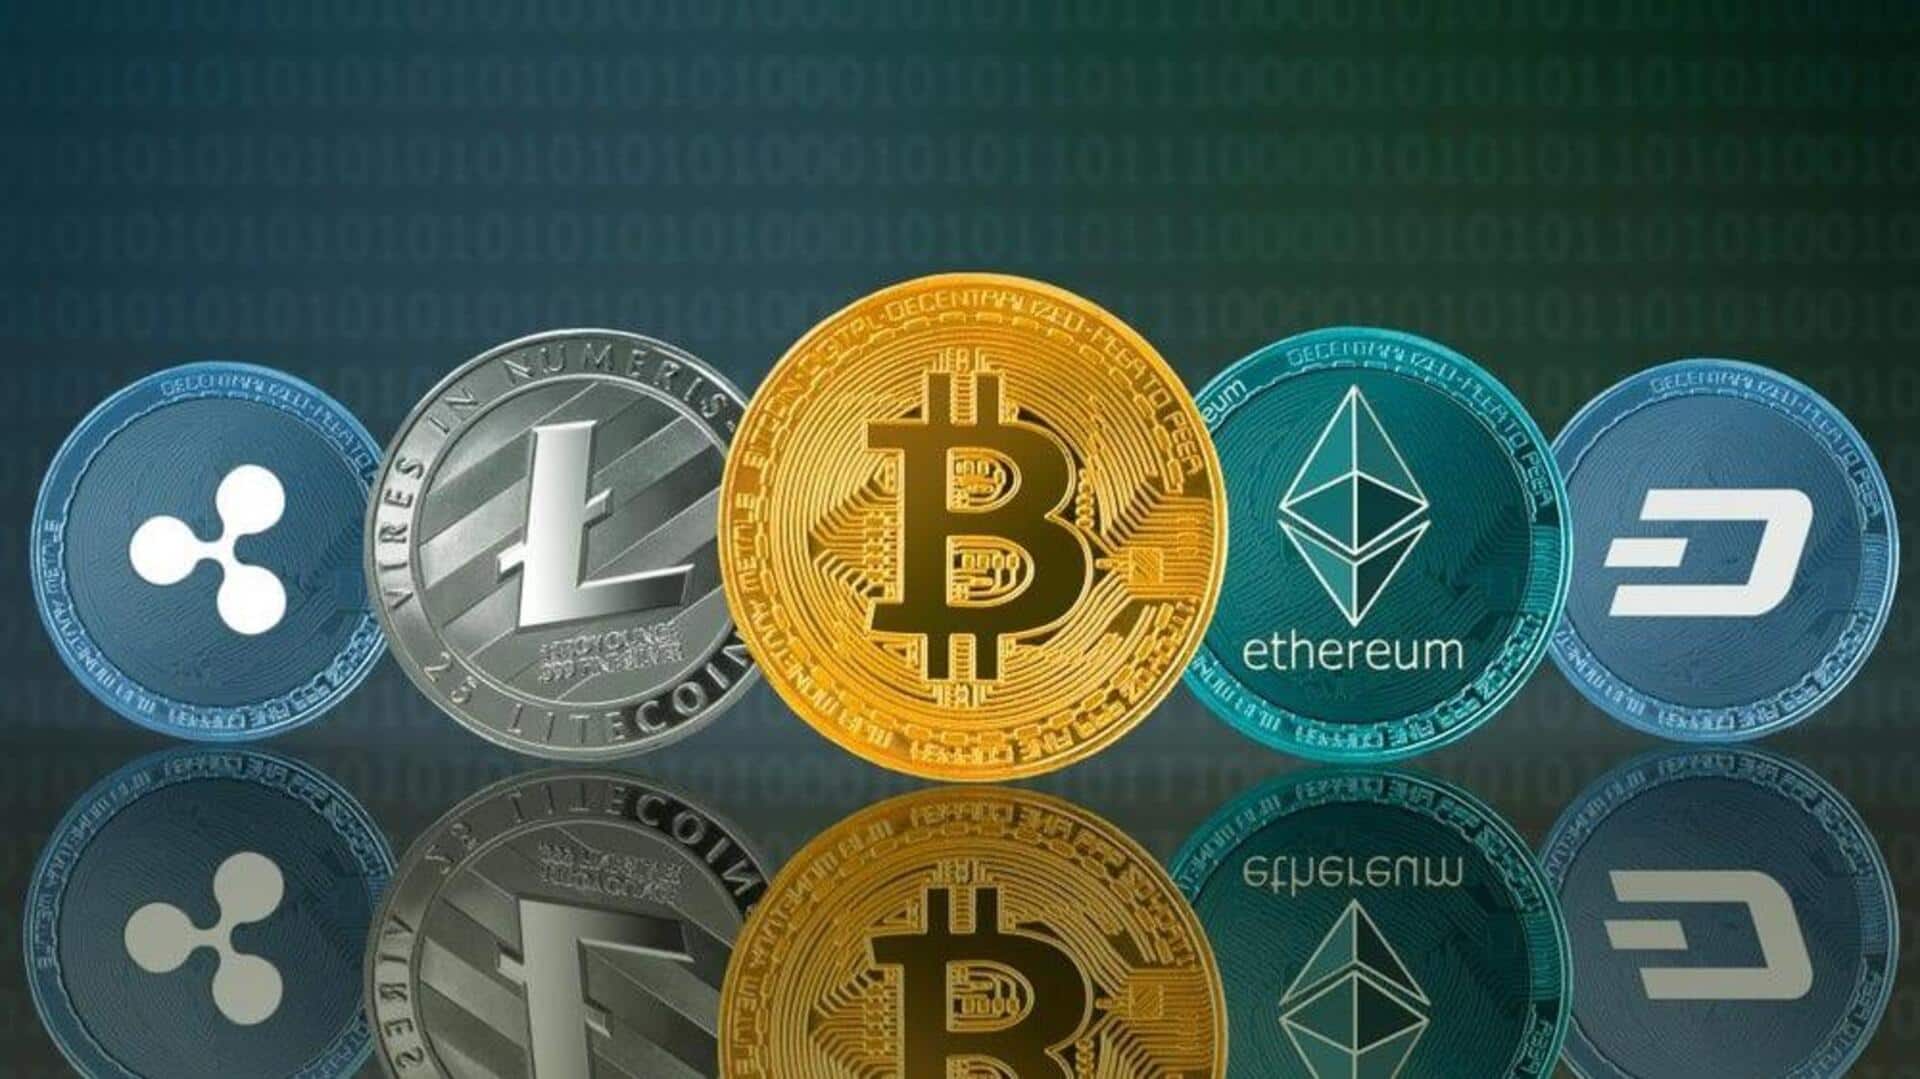 Today's cryptocurrency prices: Check Bitcoin, Dogecoin, Tether, Ethereum rates